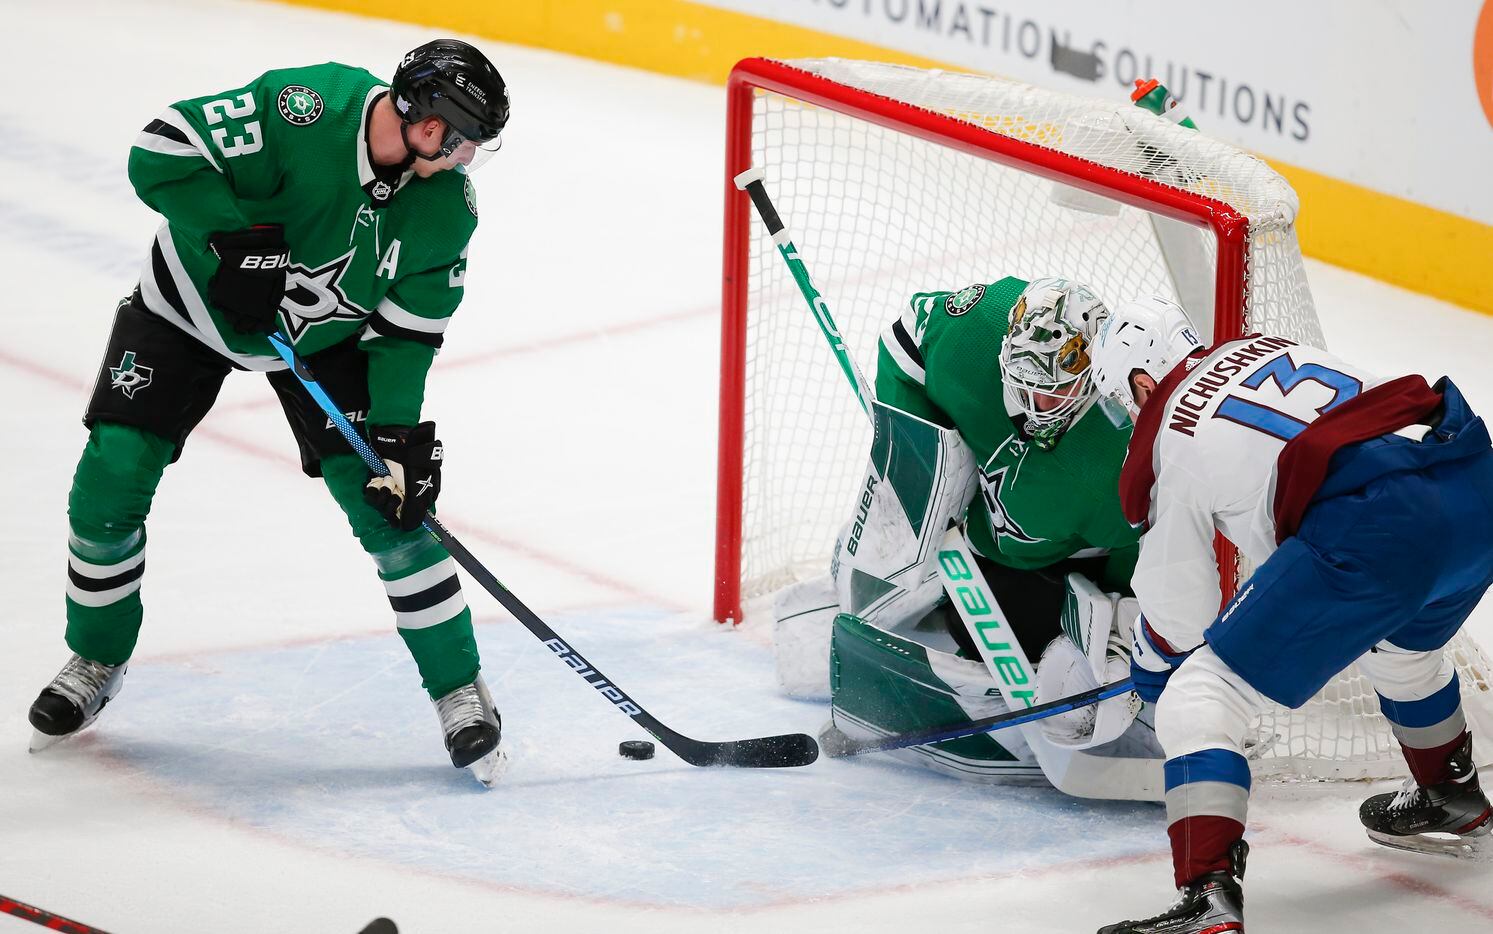 Colorado Avalanche forward Valeri Nichushkin (13) looks for the rebound as Dallas Stars defenseman Esa Lindell (23) and goaltender Jake Oettinger (29) defend during the first period of an NHL hockey game in Dallas, Friday, November 26, 2021.